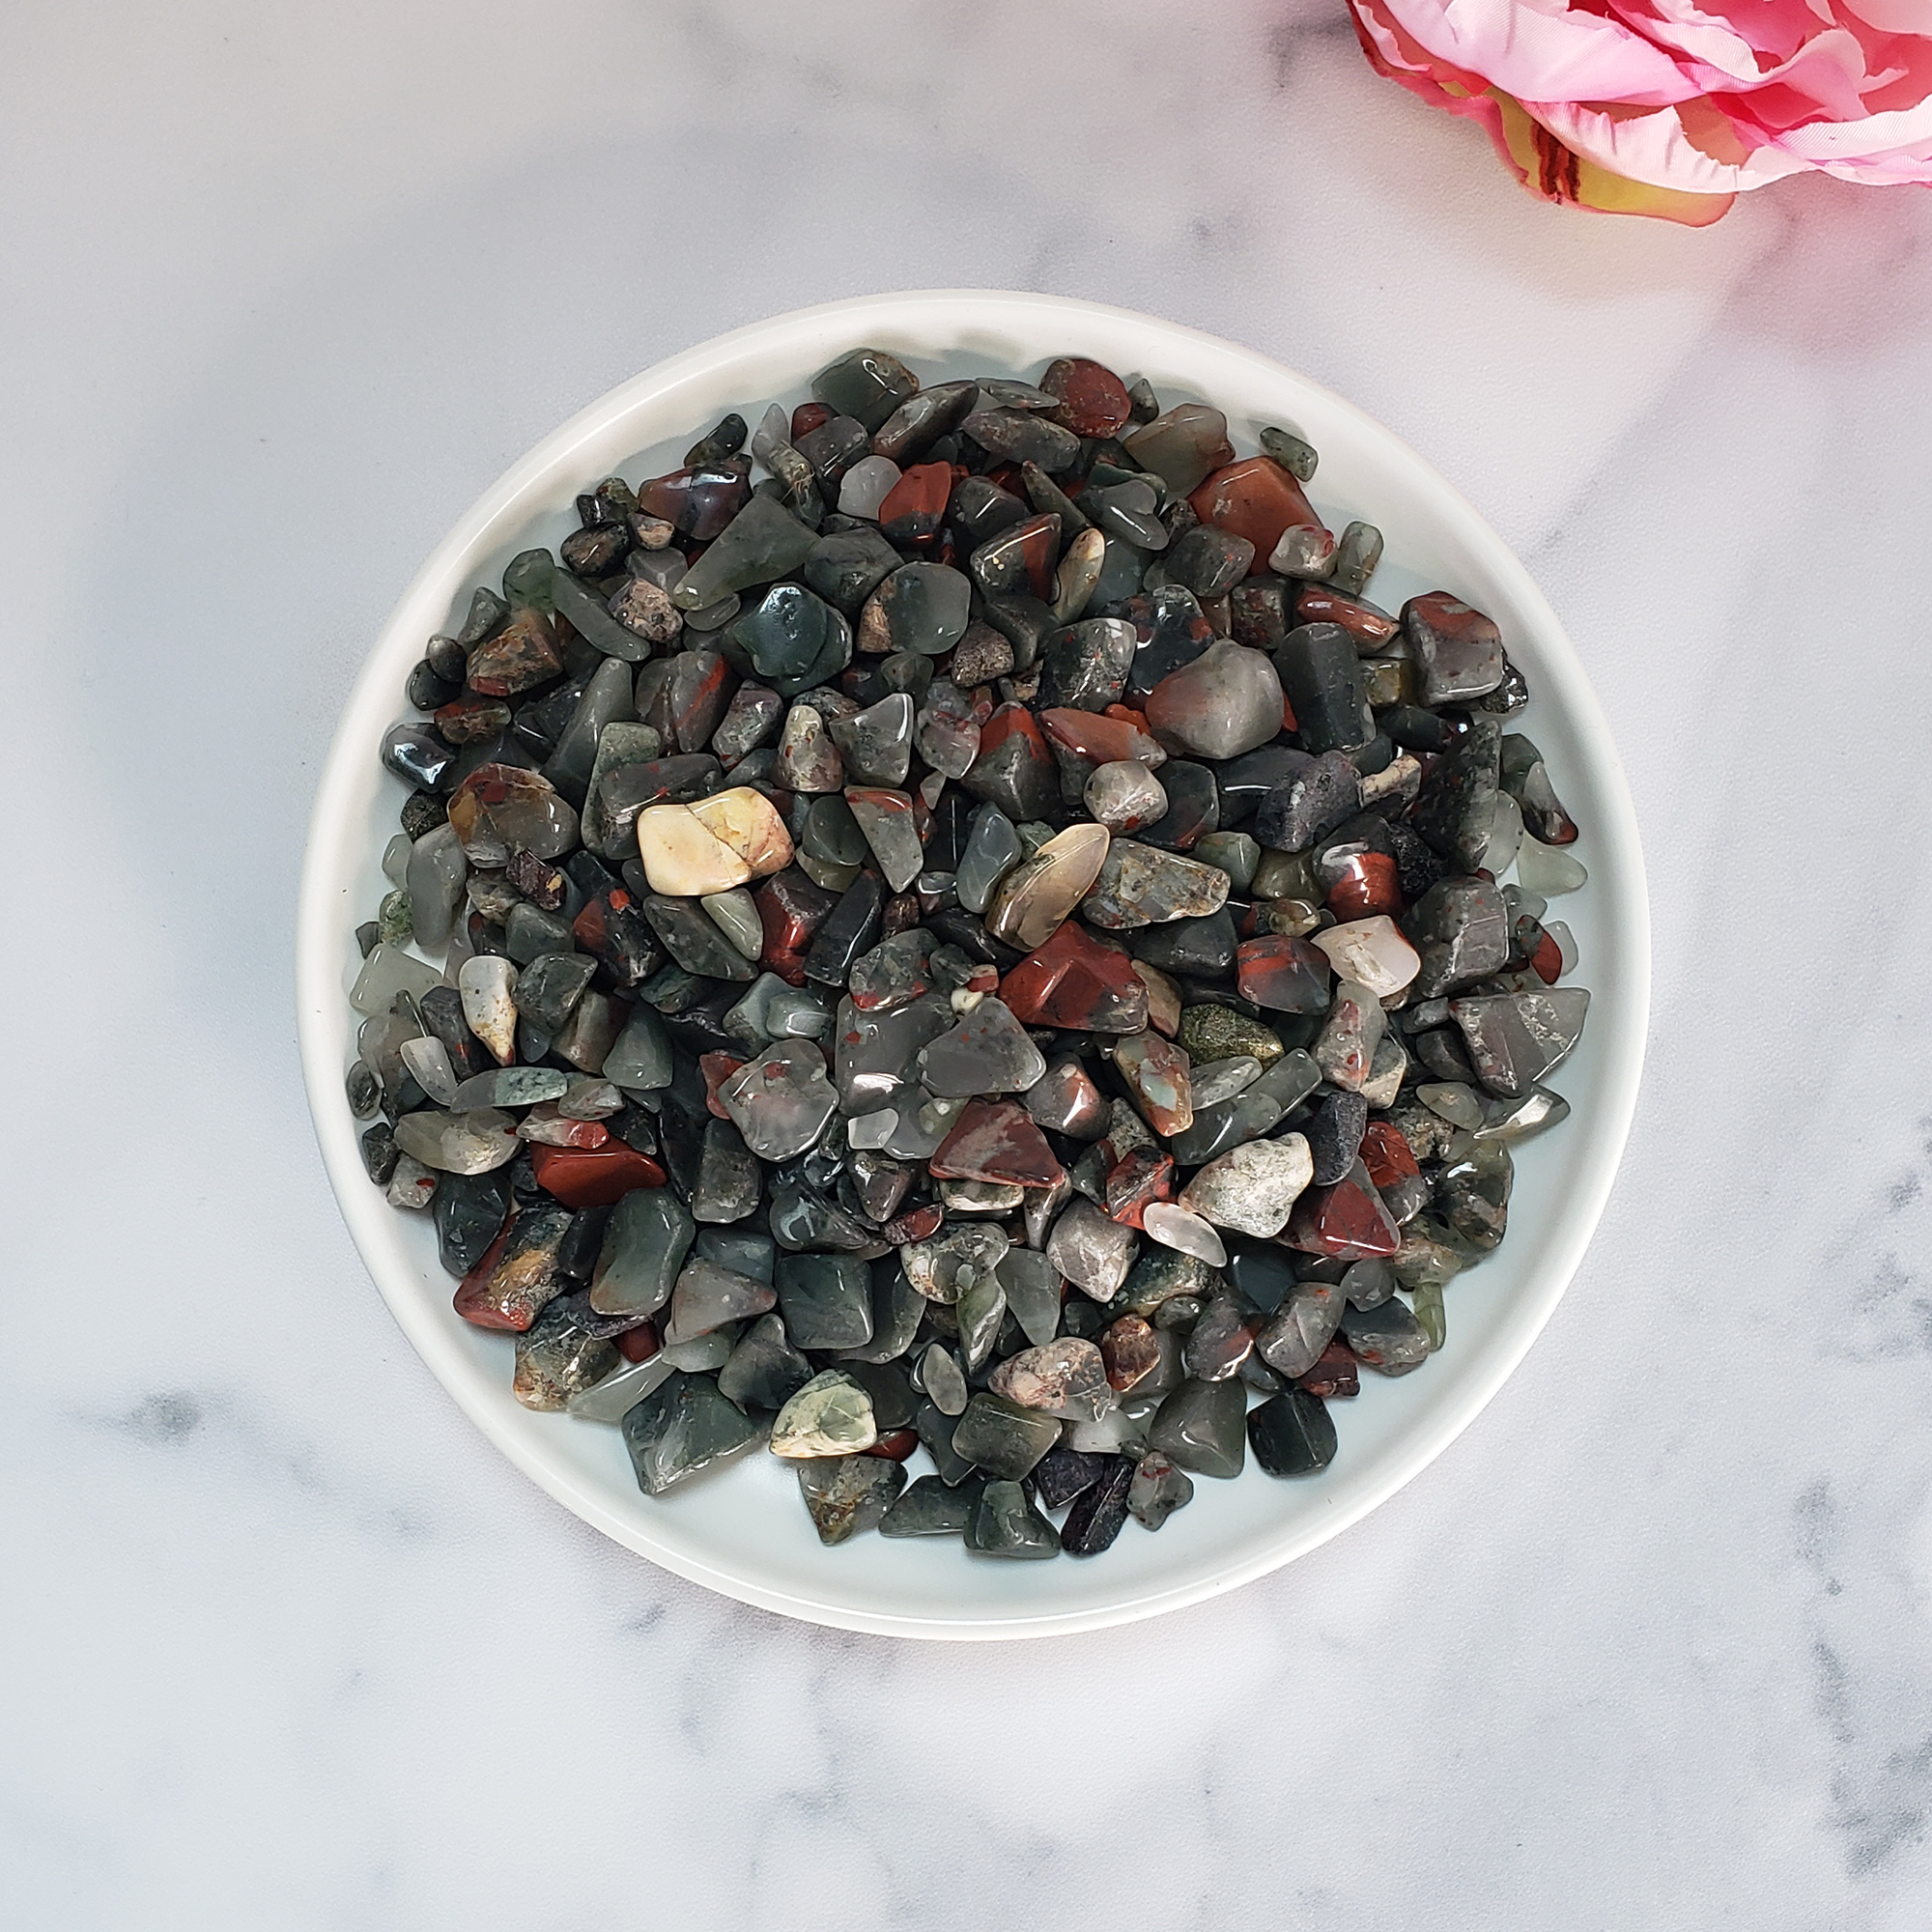 Seftonite Bloodstone Natural Gemstone Chips By the Ounce - Bloodstone Crystal Chips in White Ceramic Bowl